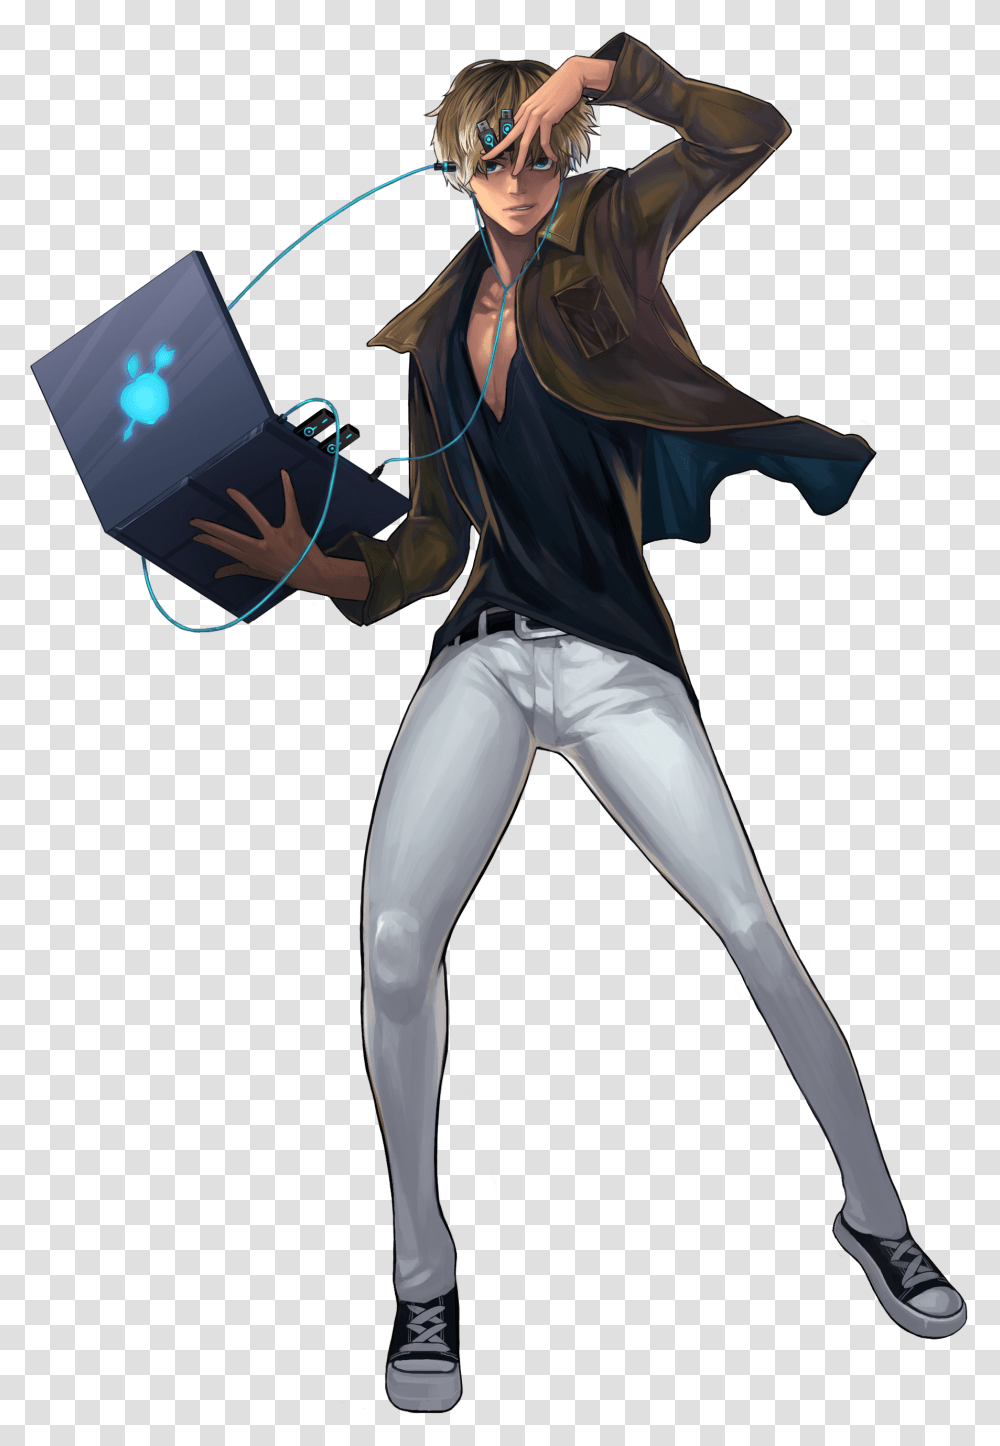 Official Black Survival Wiki Black Survival Character, Clothing, Person, Leisure Activities, Dance Pose Transparent Png